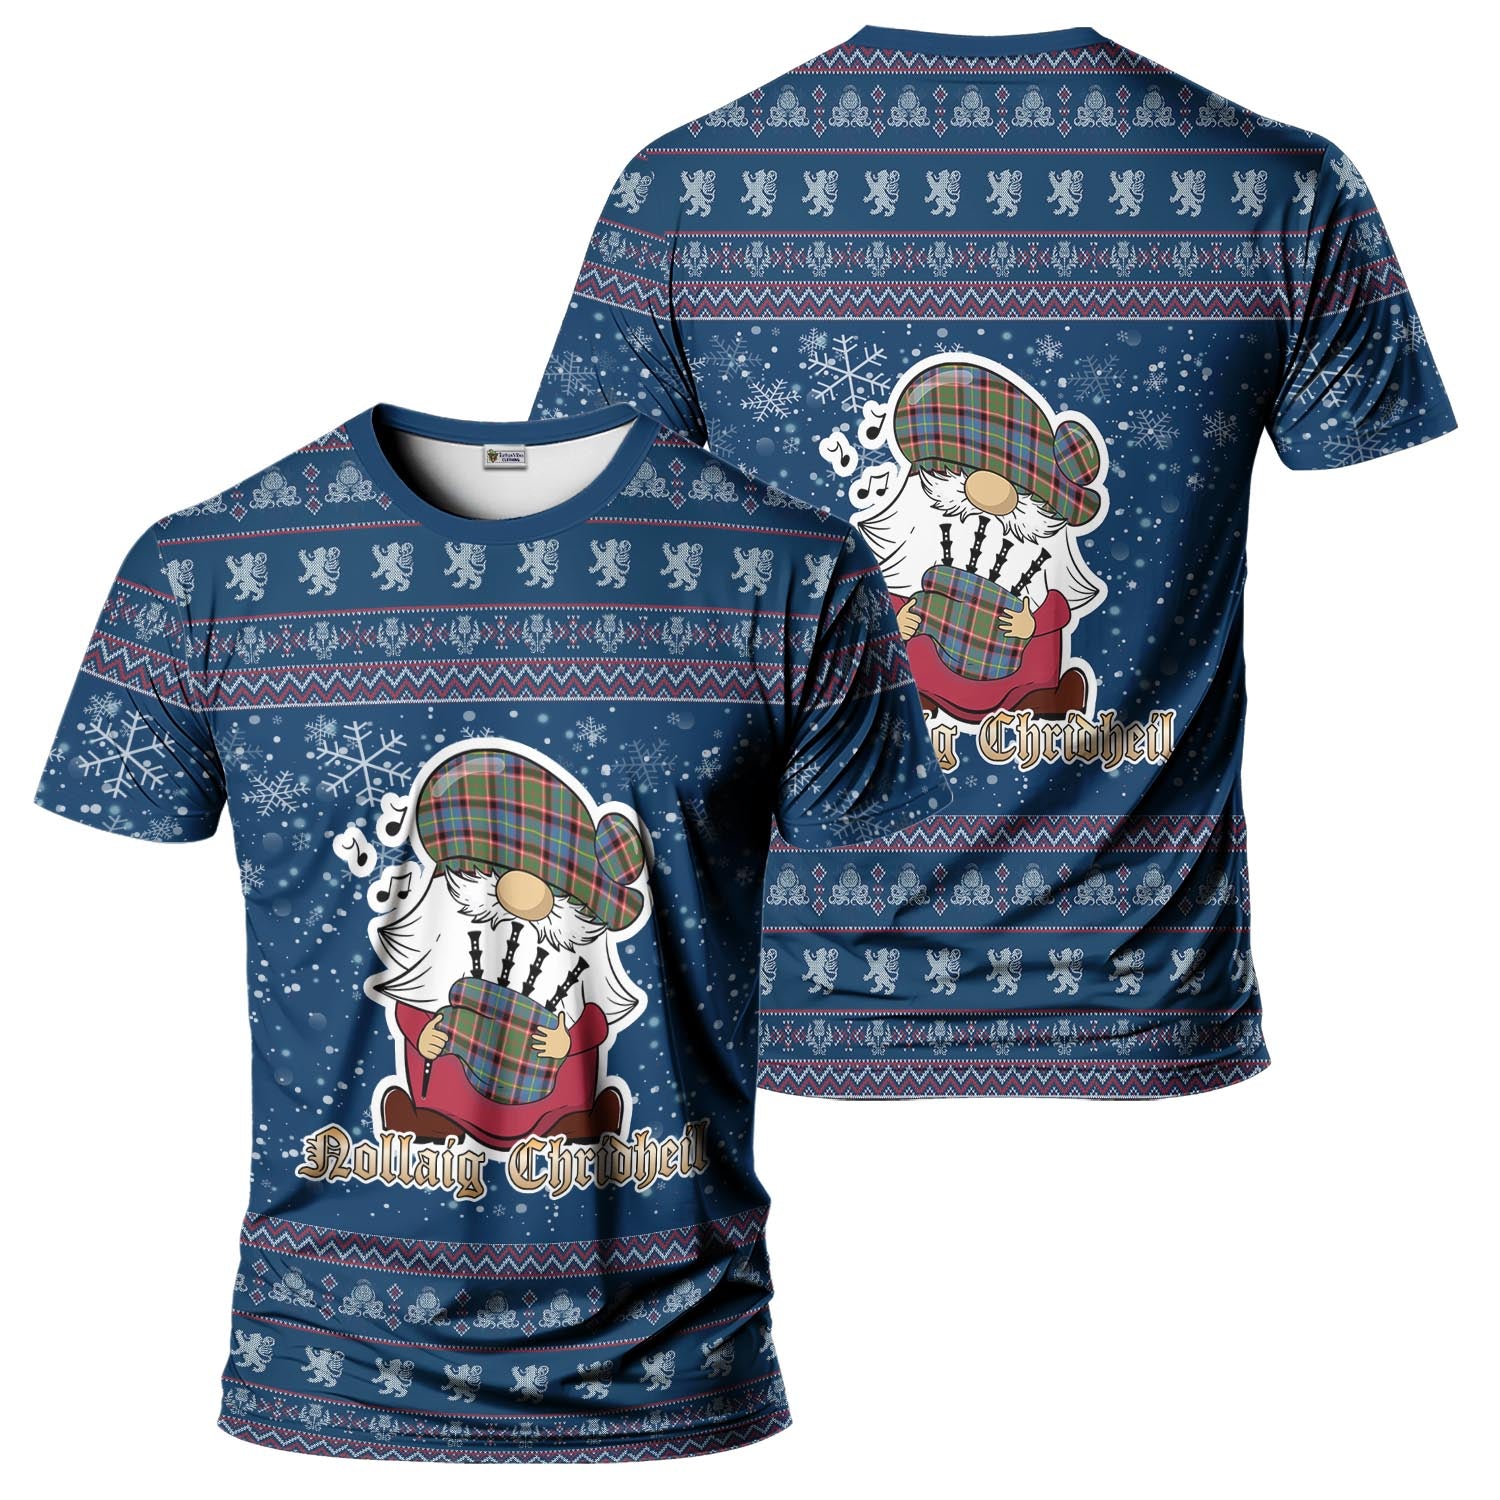 Stirling Bannockburn Clan Christmas Family T-Shirt with Funny Gnome Playing Bagpipes Kid's Shirt Blue - Tartanvibesclothing